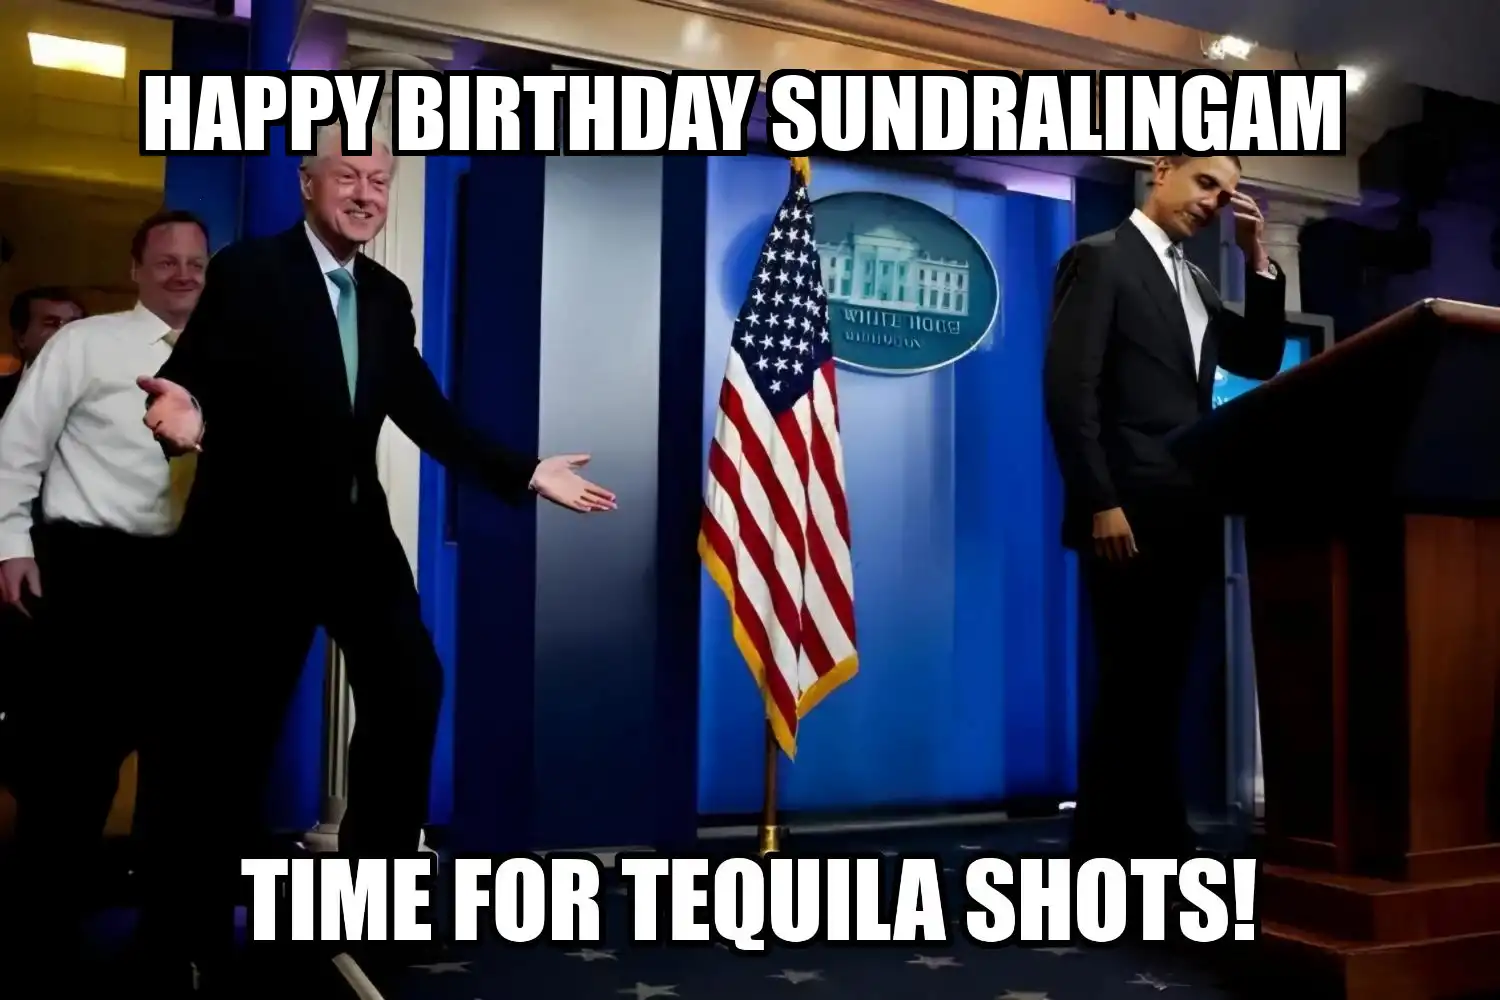 Happy Birthday Sundralingam Time For Tequila Shots Memes